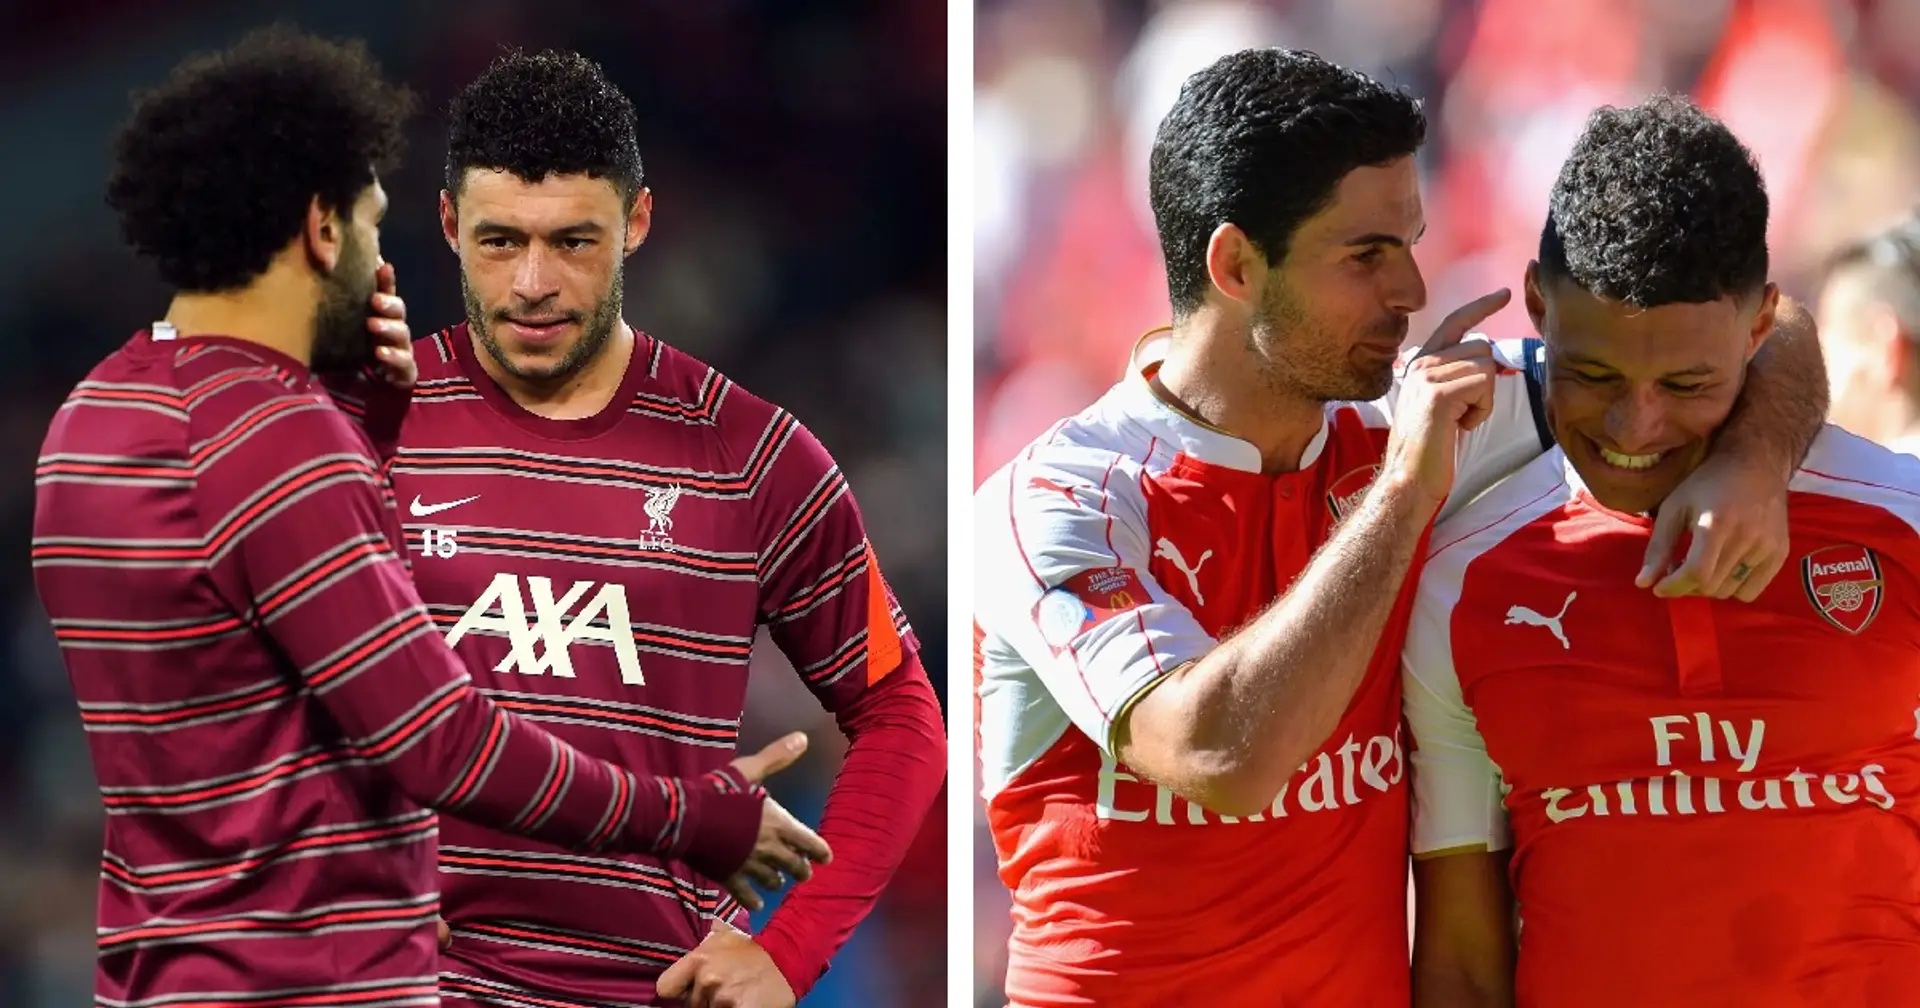 Alex Oxlade-Chamberlain highlights major difference between mentality at Liverpool and Arsenal